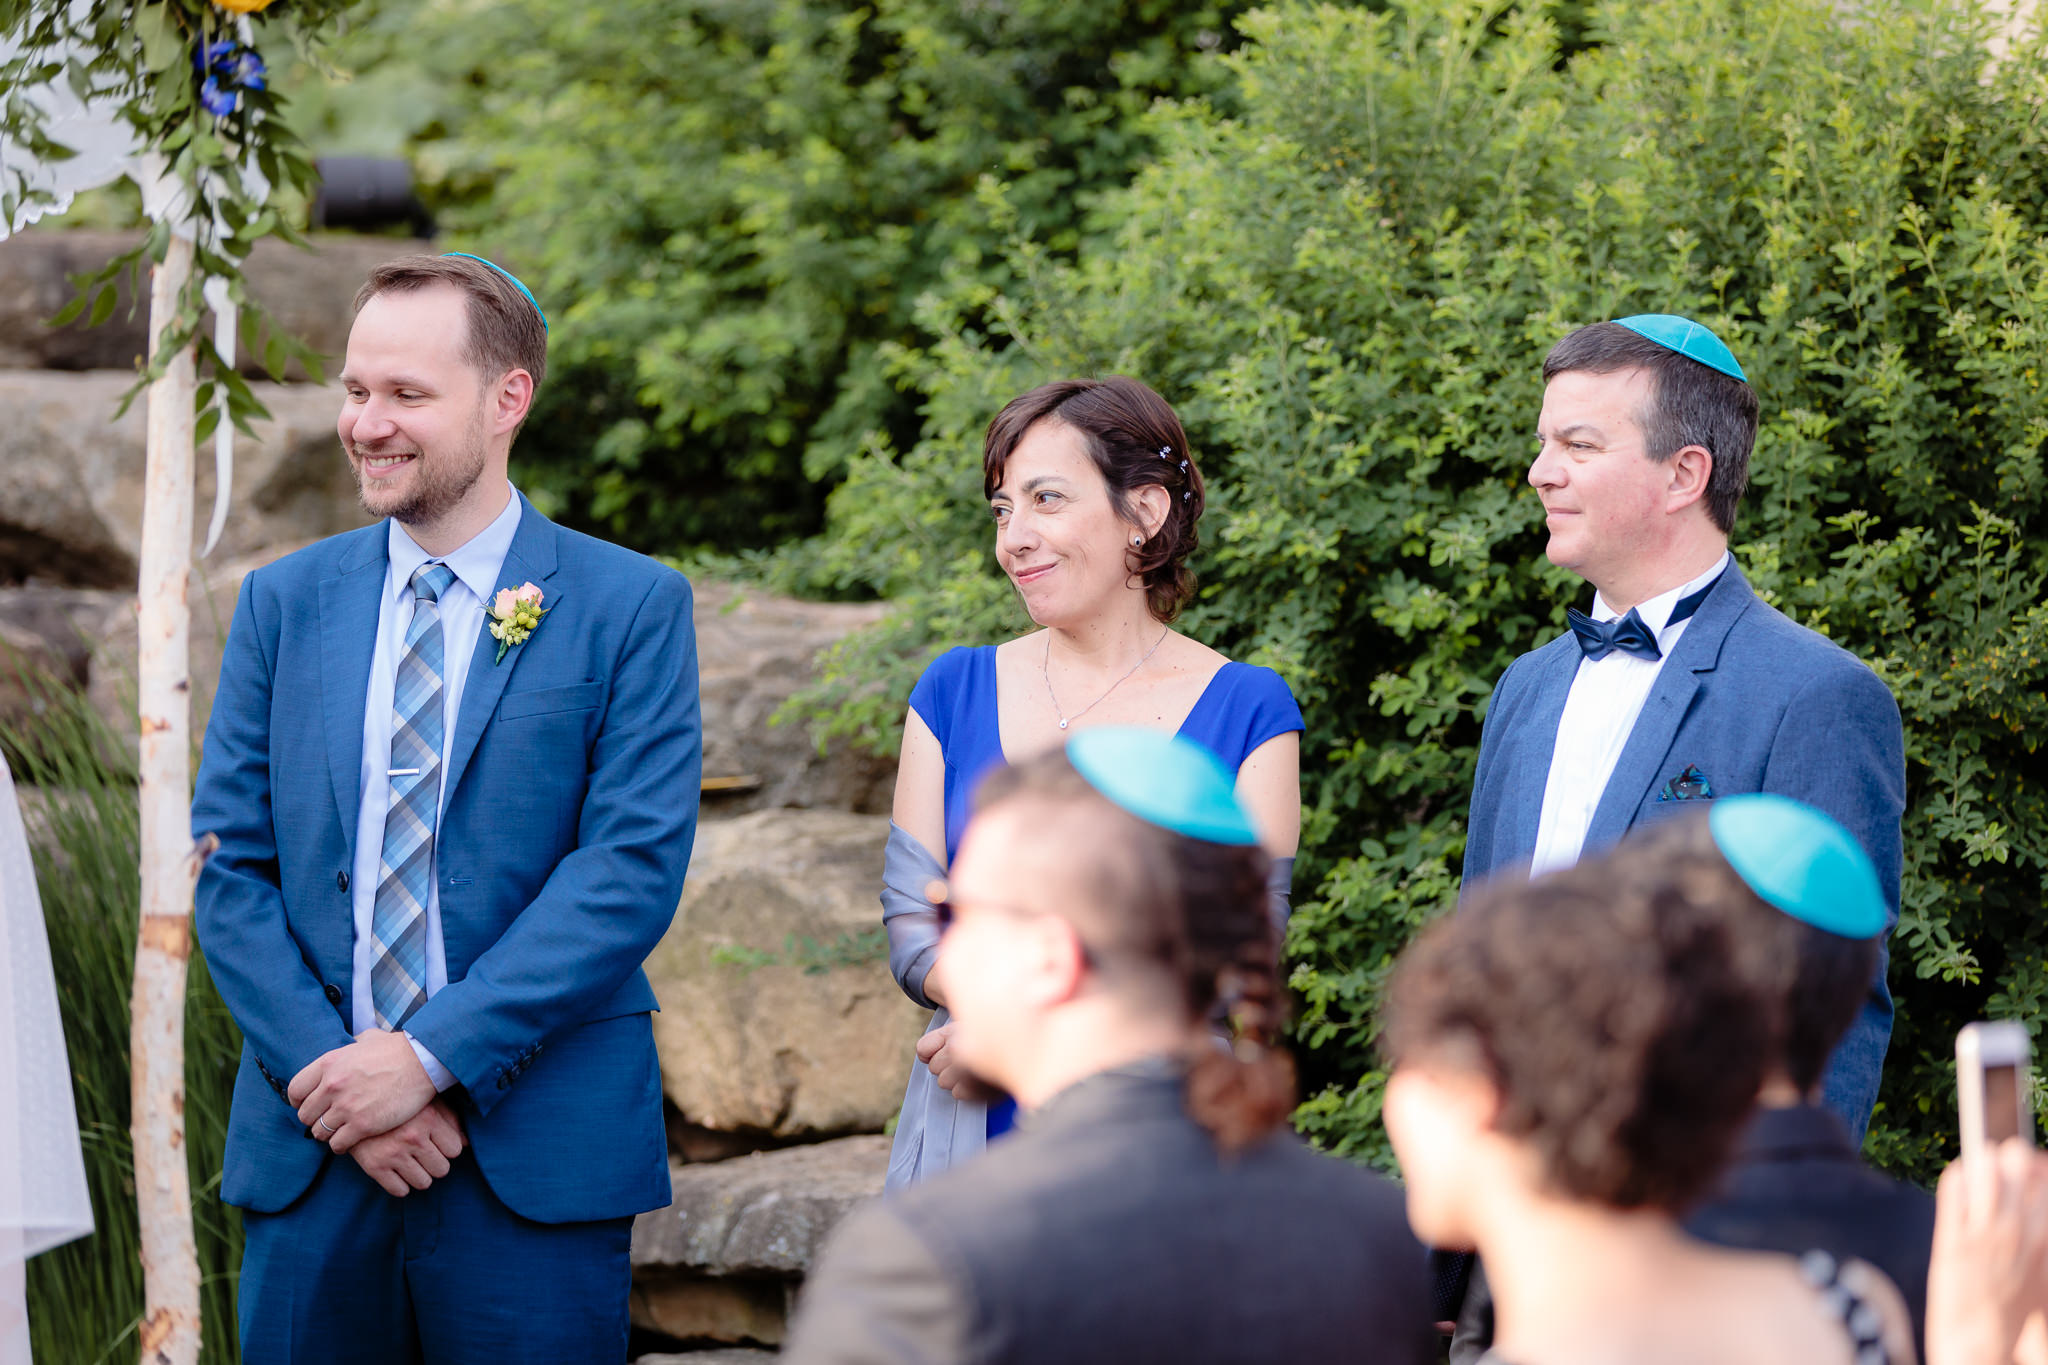 Parents of the groom & best man smile as he gets married at Phipps Conservatory